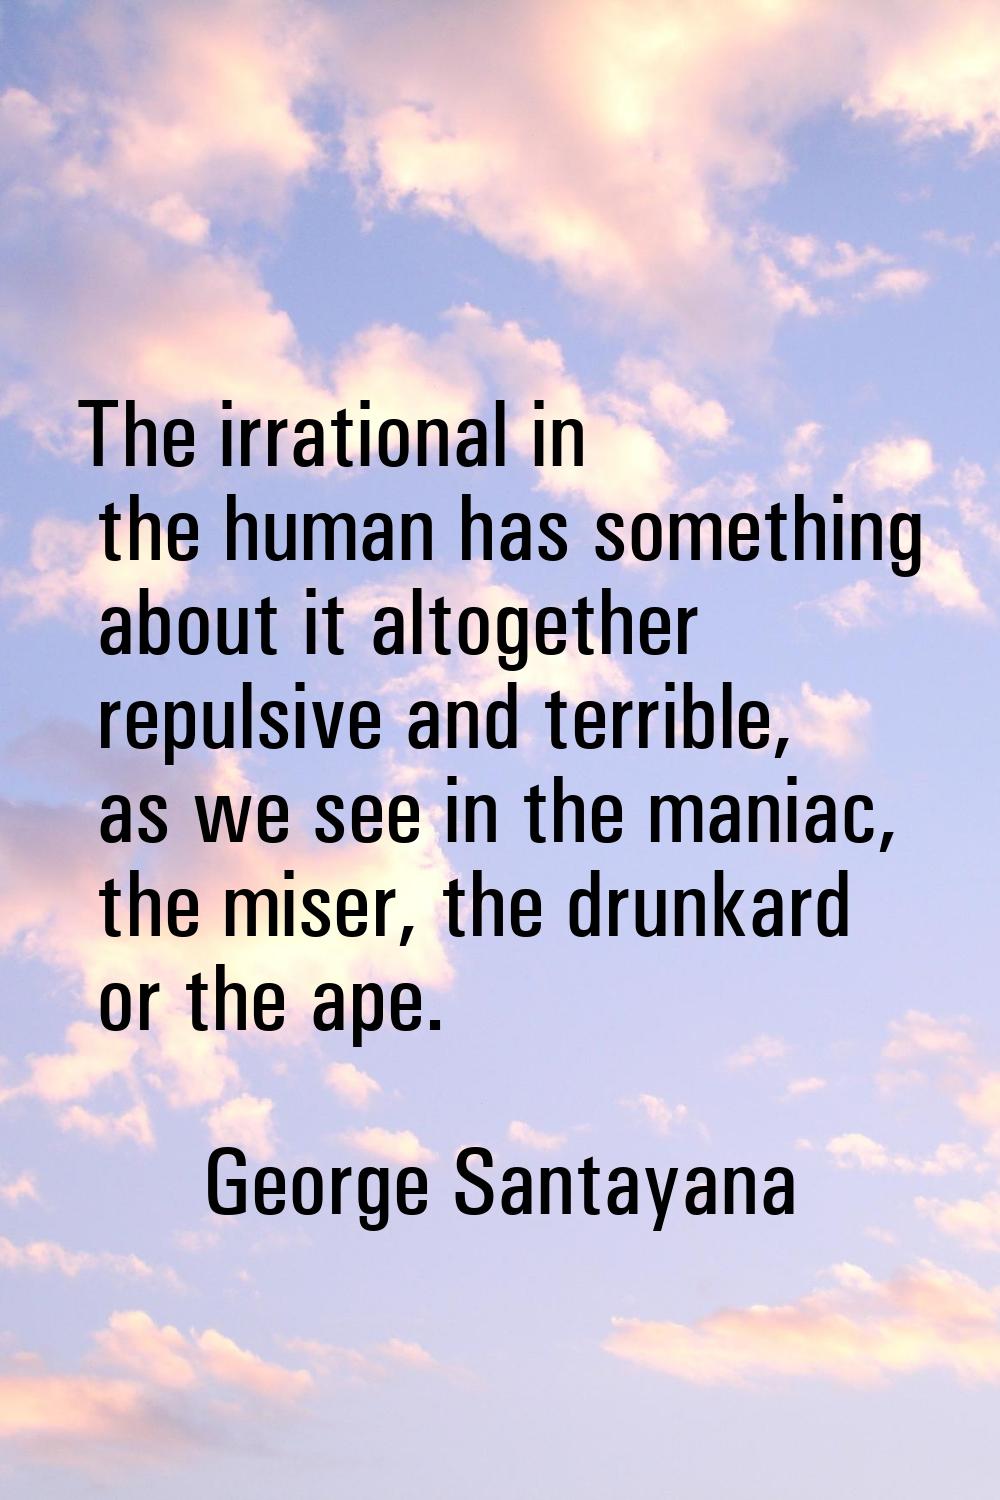 The irrational in the human has something about it altogether repulsive and terrible, as we see in 